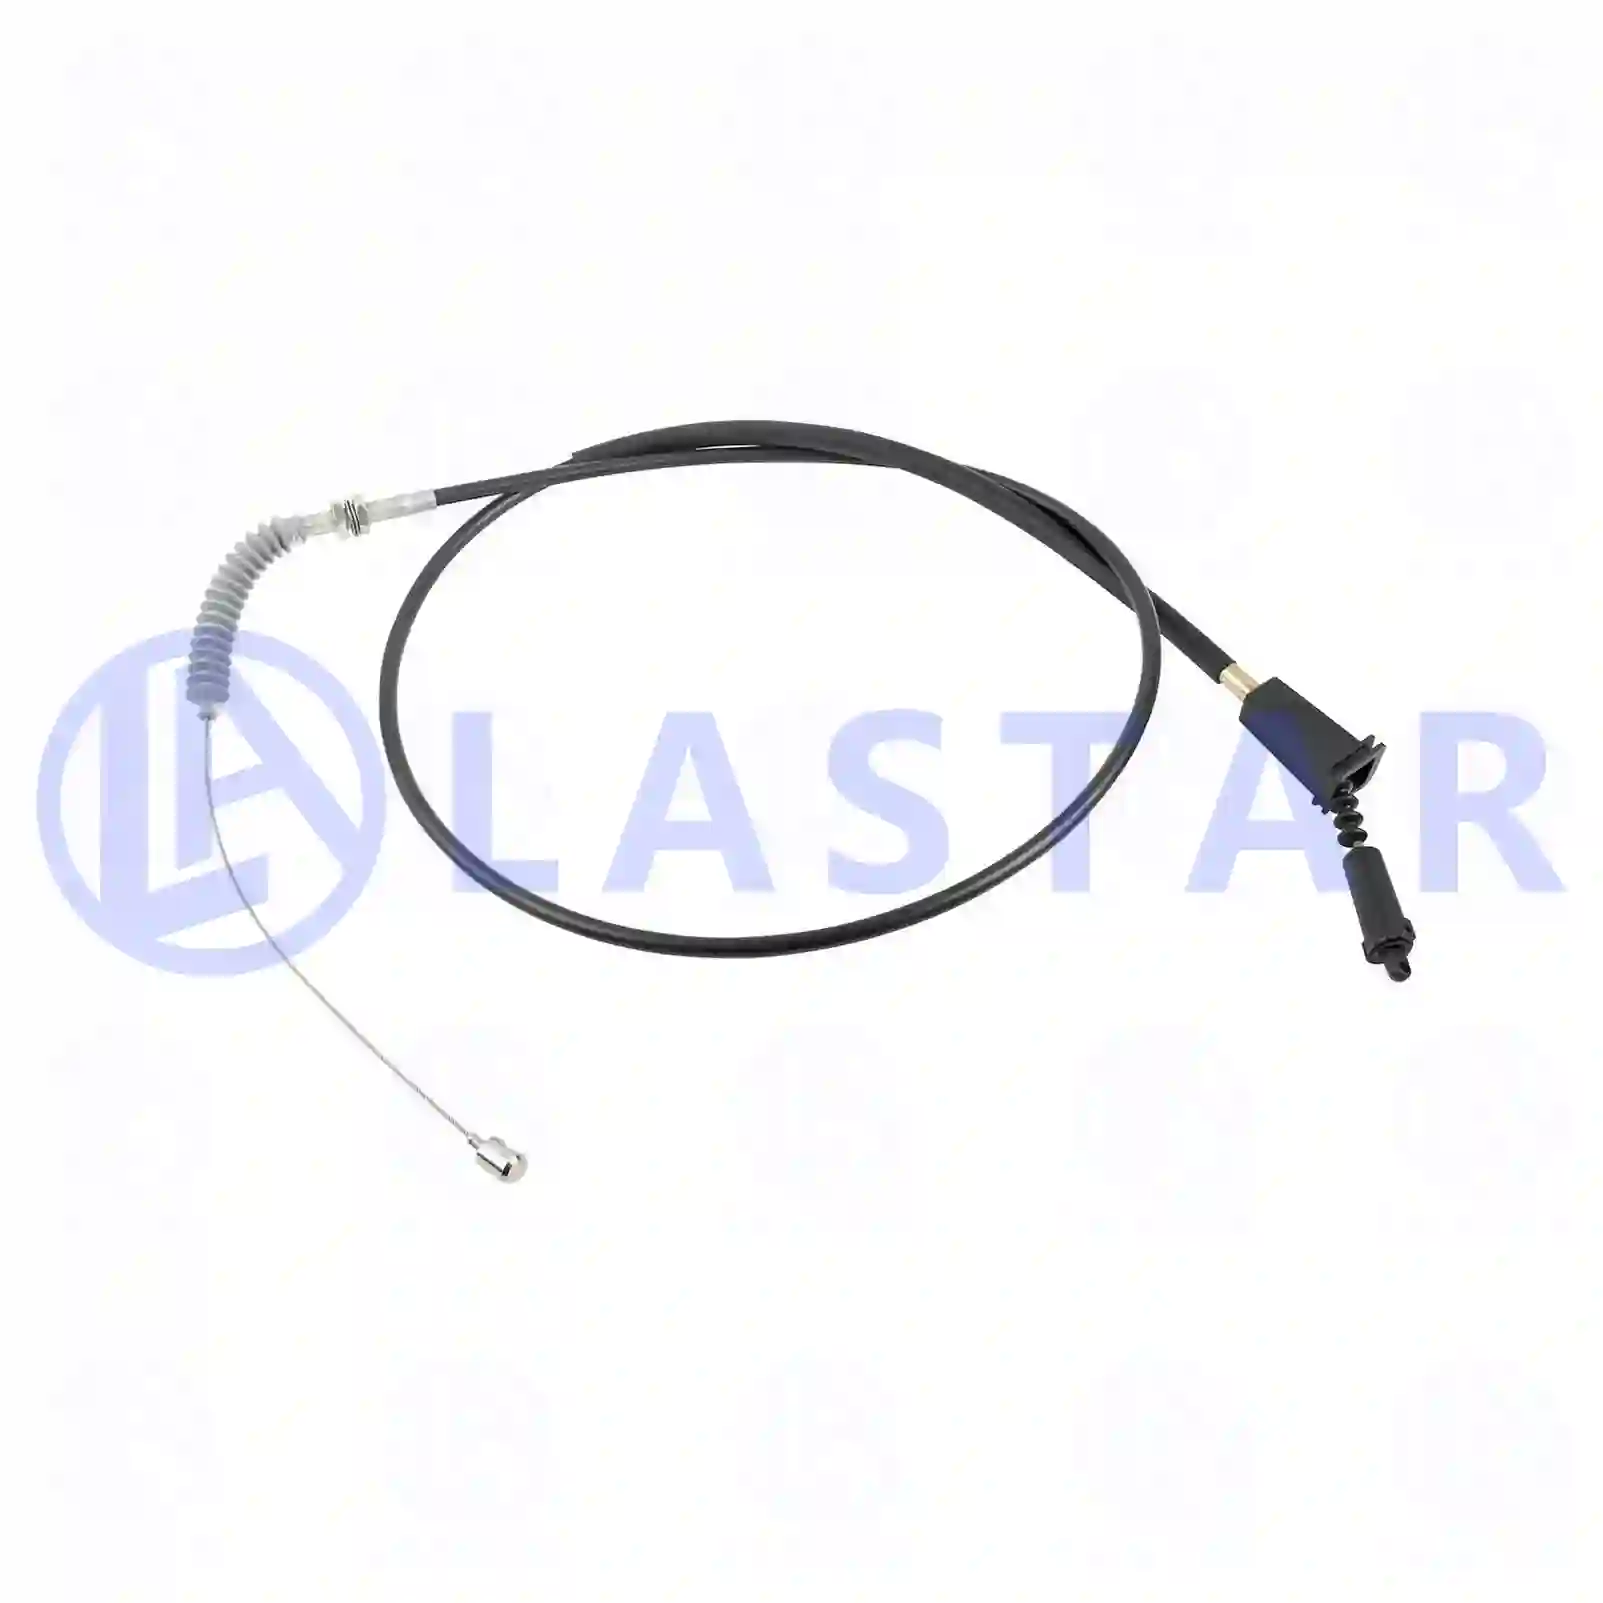 Throttle cable, 77703679, 41029182, 4102991 ||  77703679 Lastar Spare Part | Truck Spare Parts, Auotomotive Spare Parts Throttle cable, 77703679, 41029182, 4102991 ||  77703679 Lastar Spare Part | Truck Spare Parts, Auotomotive Spare Parts